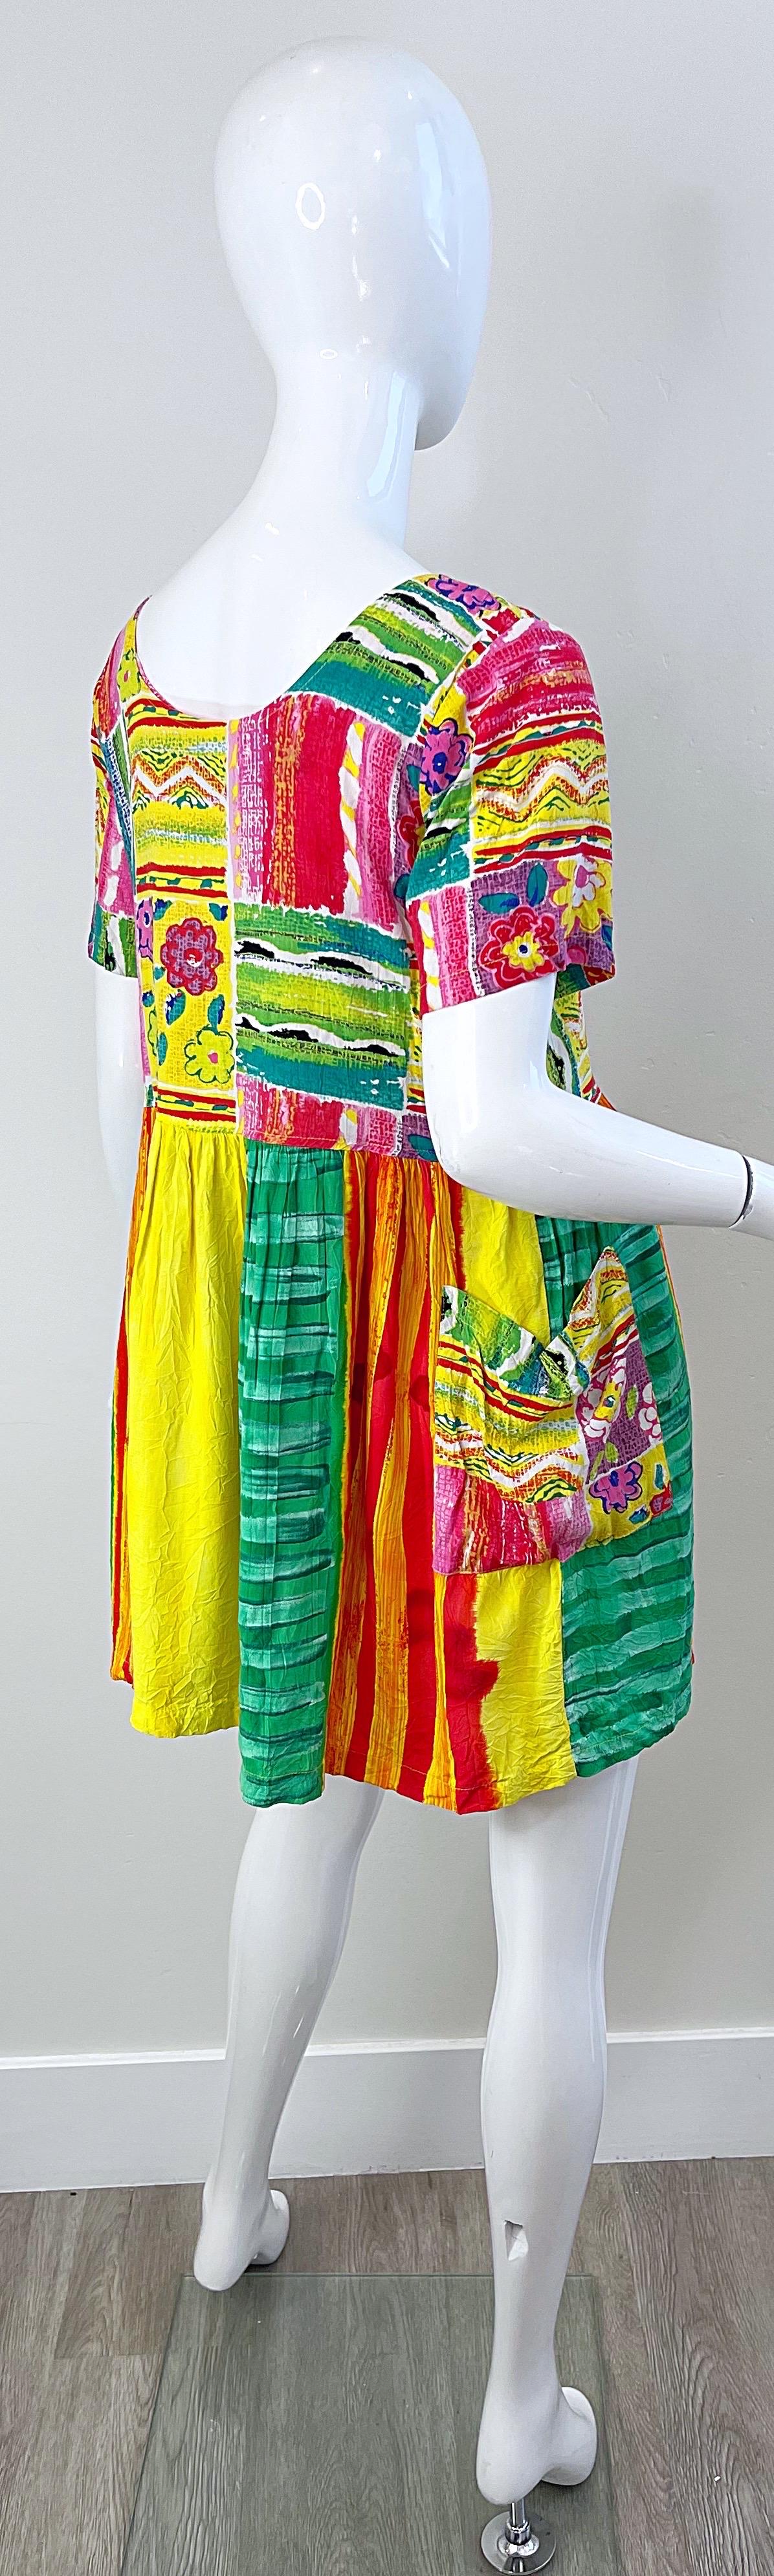 1990s Jams World Brightly Colored Abstract Flower Print Vintage 90s Mini Dress In Excellent Condition For Sale In San Diego, CA